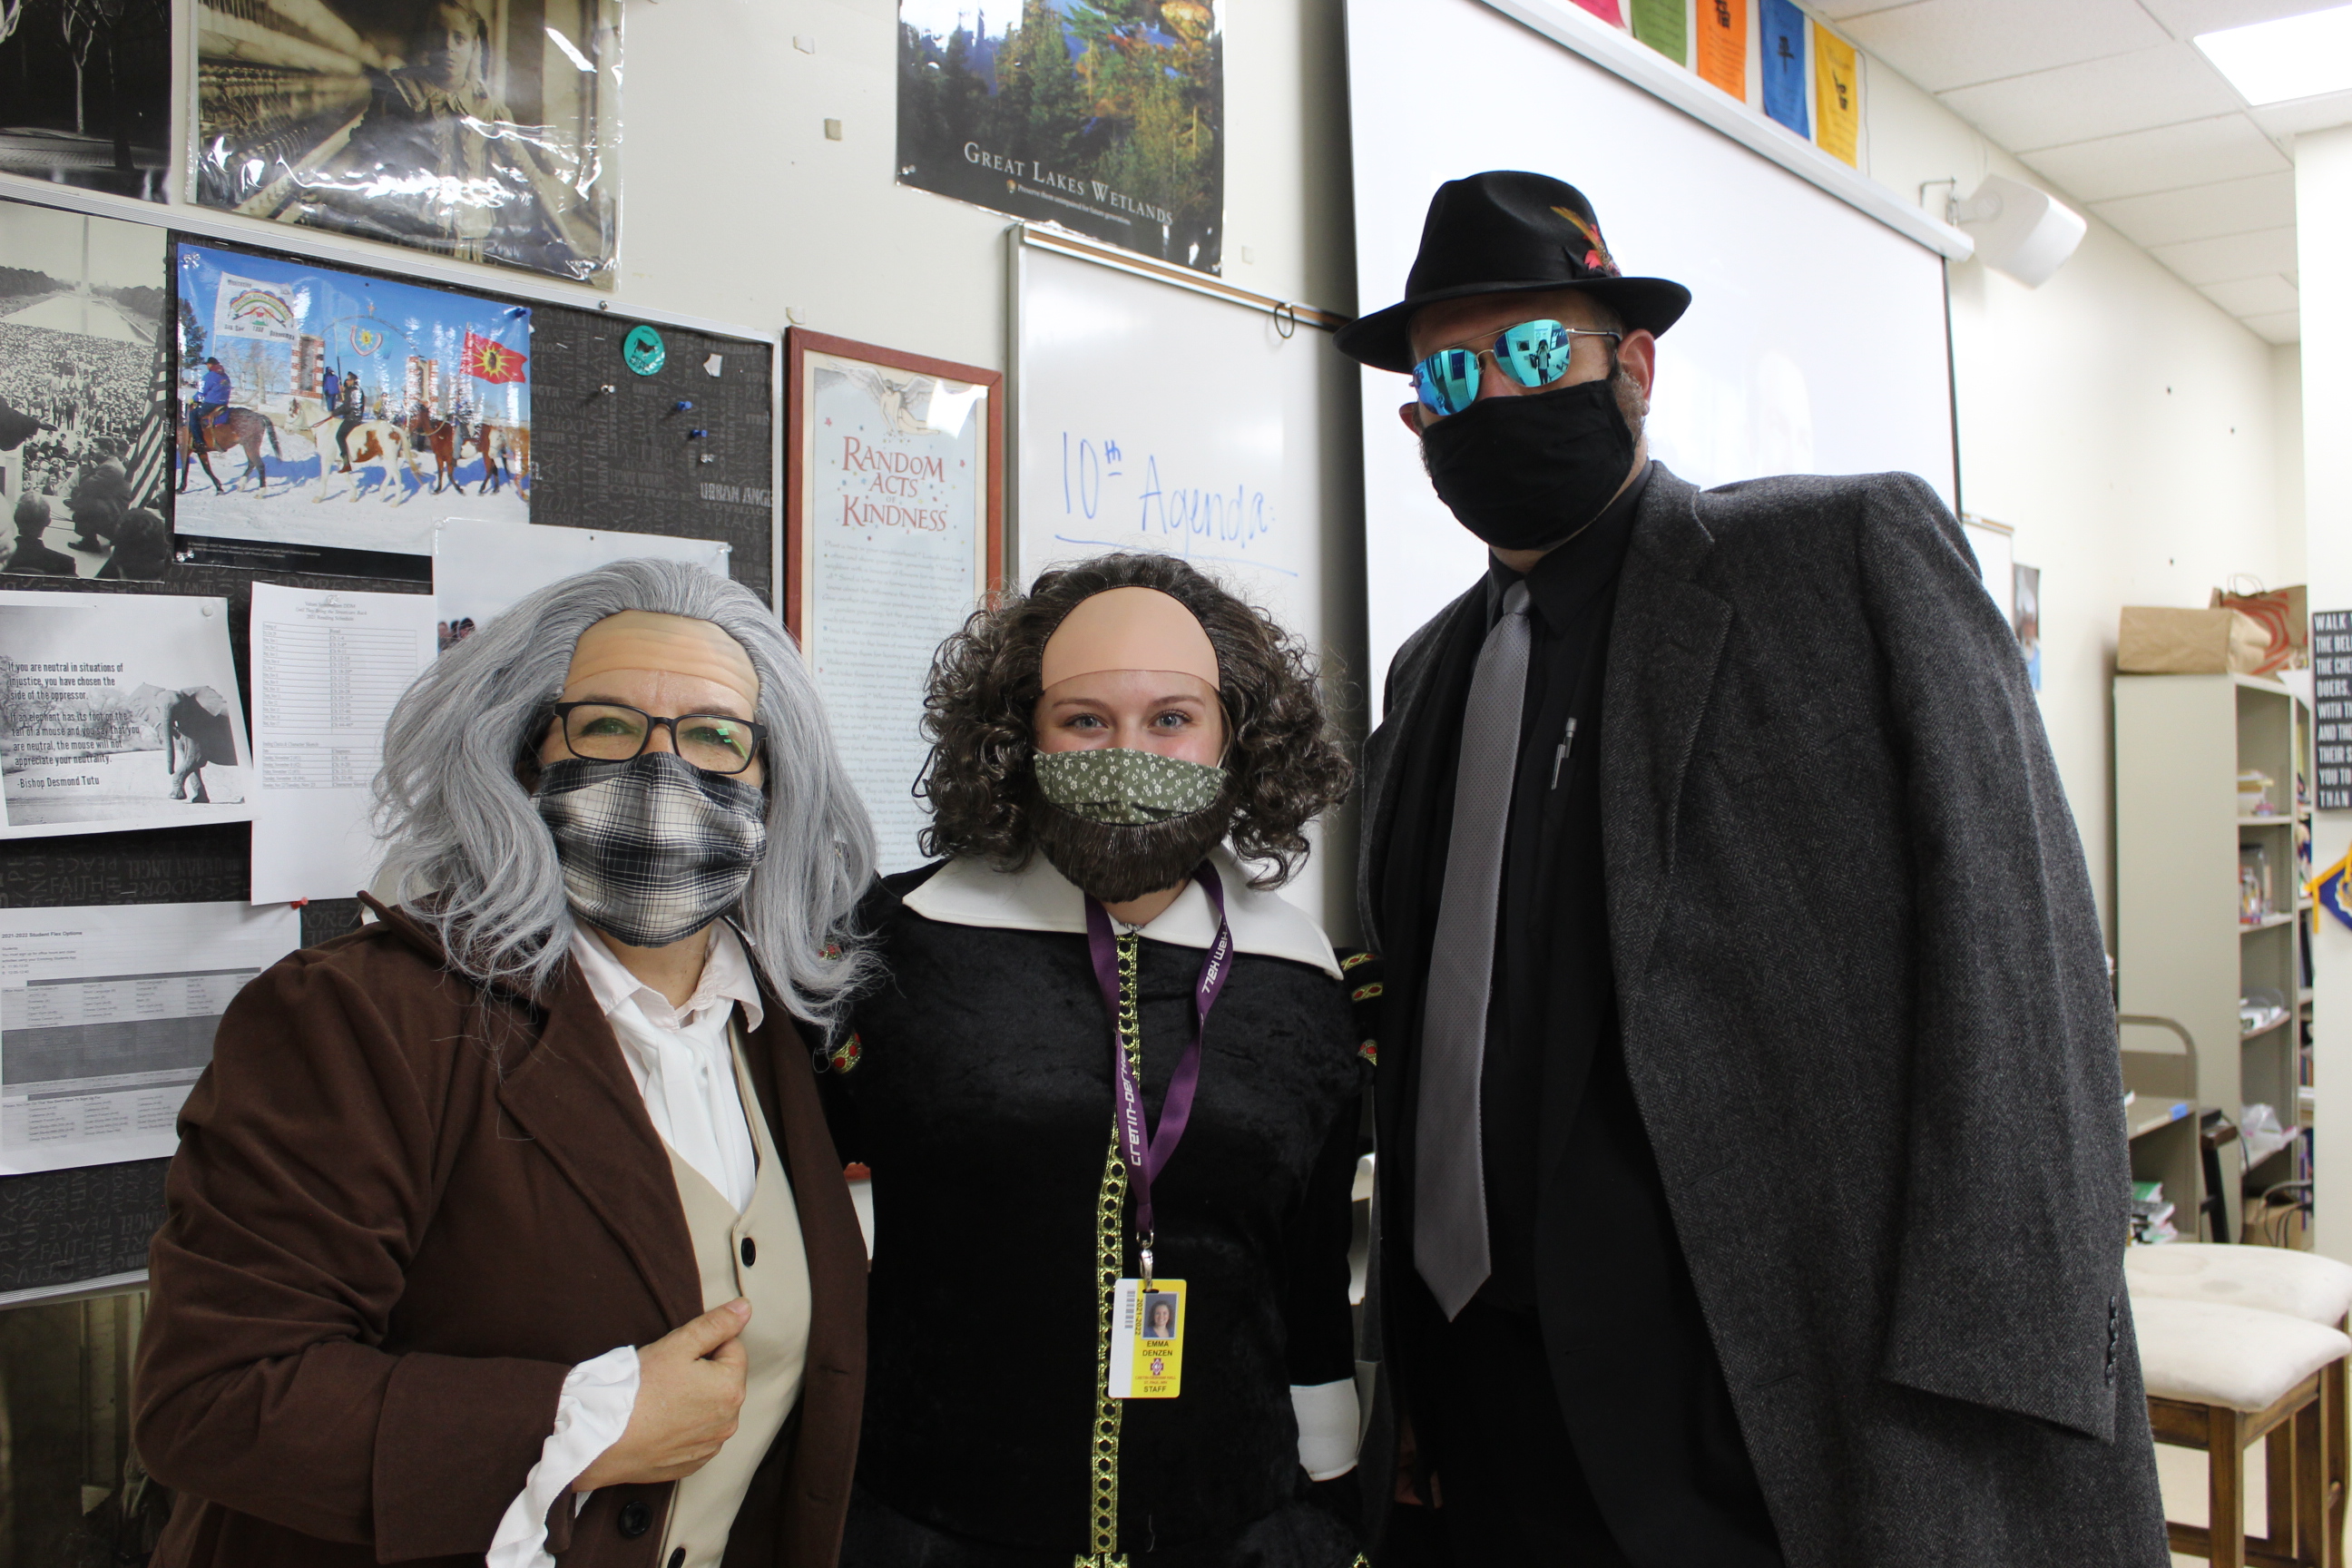 DeVos, Denzen, and Moss dressed up for Halloween earlier this year.